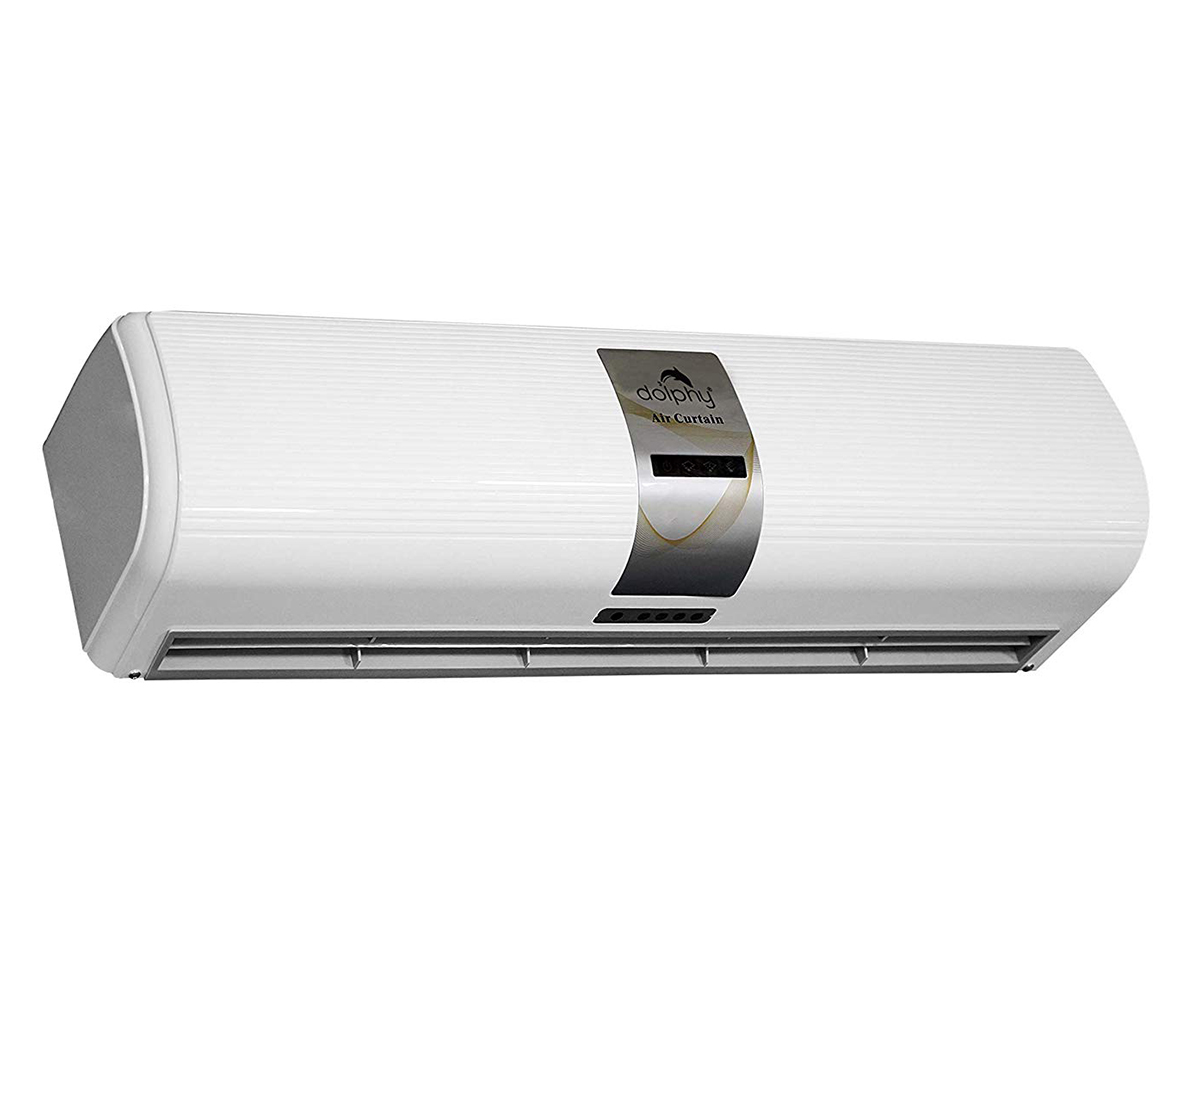 ABS Sensor Air Curtains With Remote Control
